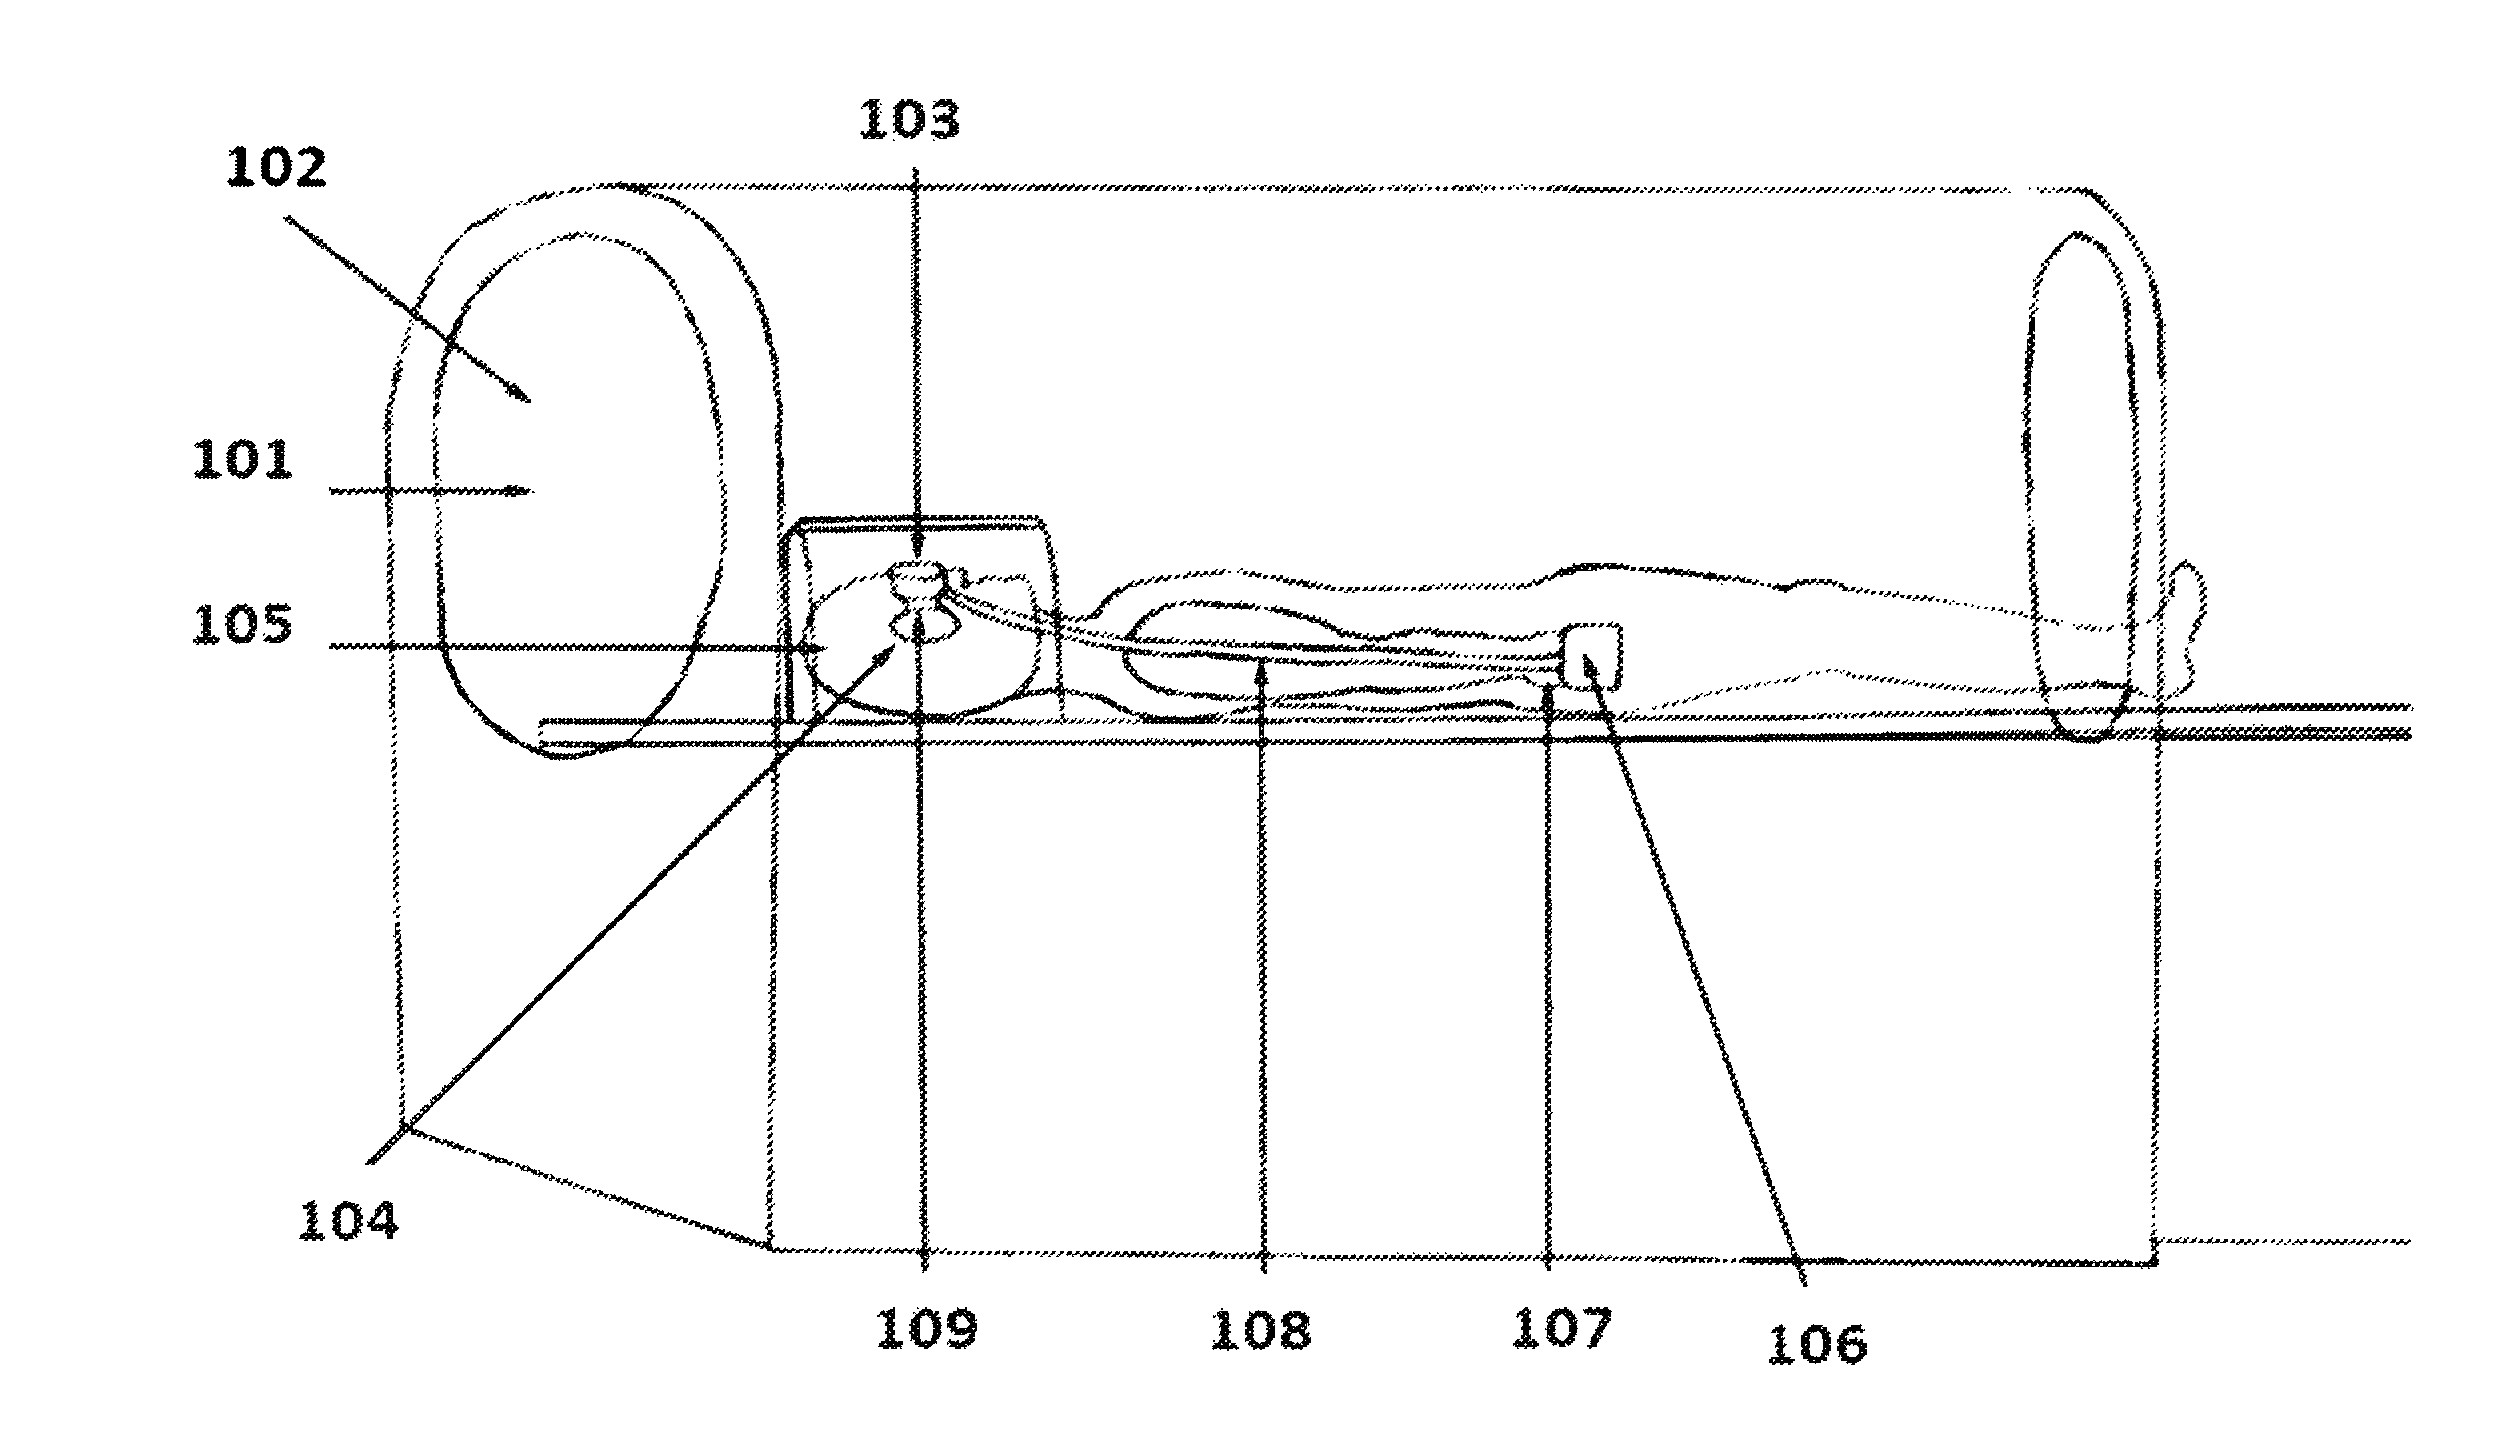 Entertainment system for use during the operation of a magnetic resonance imaging device